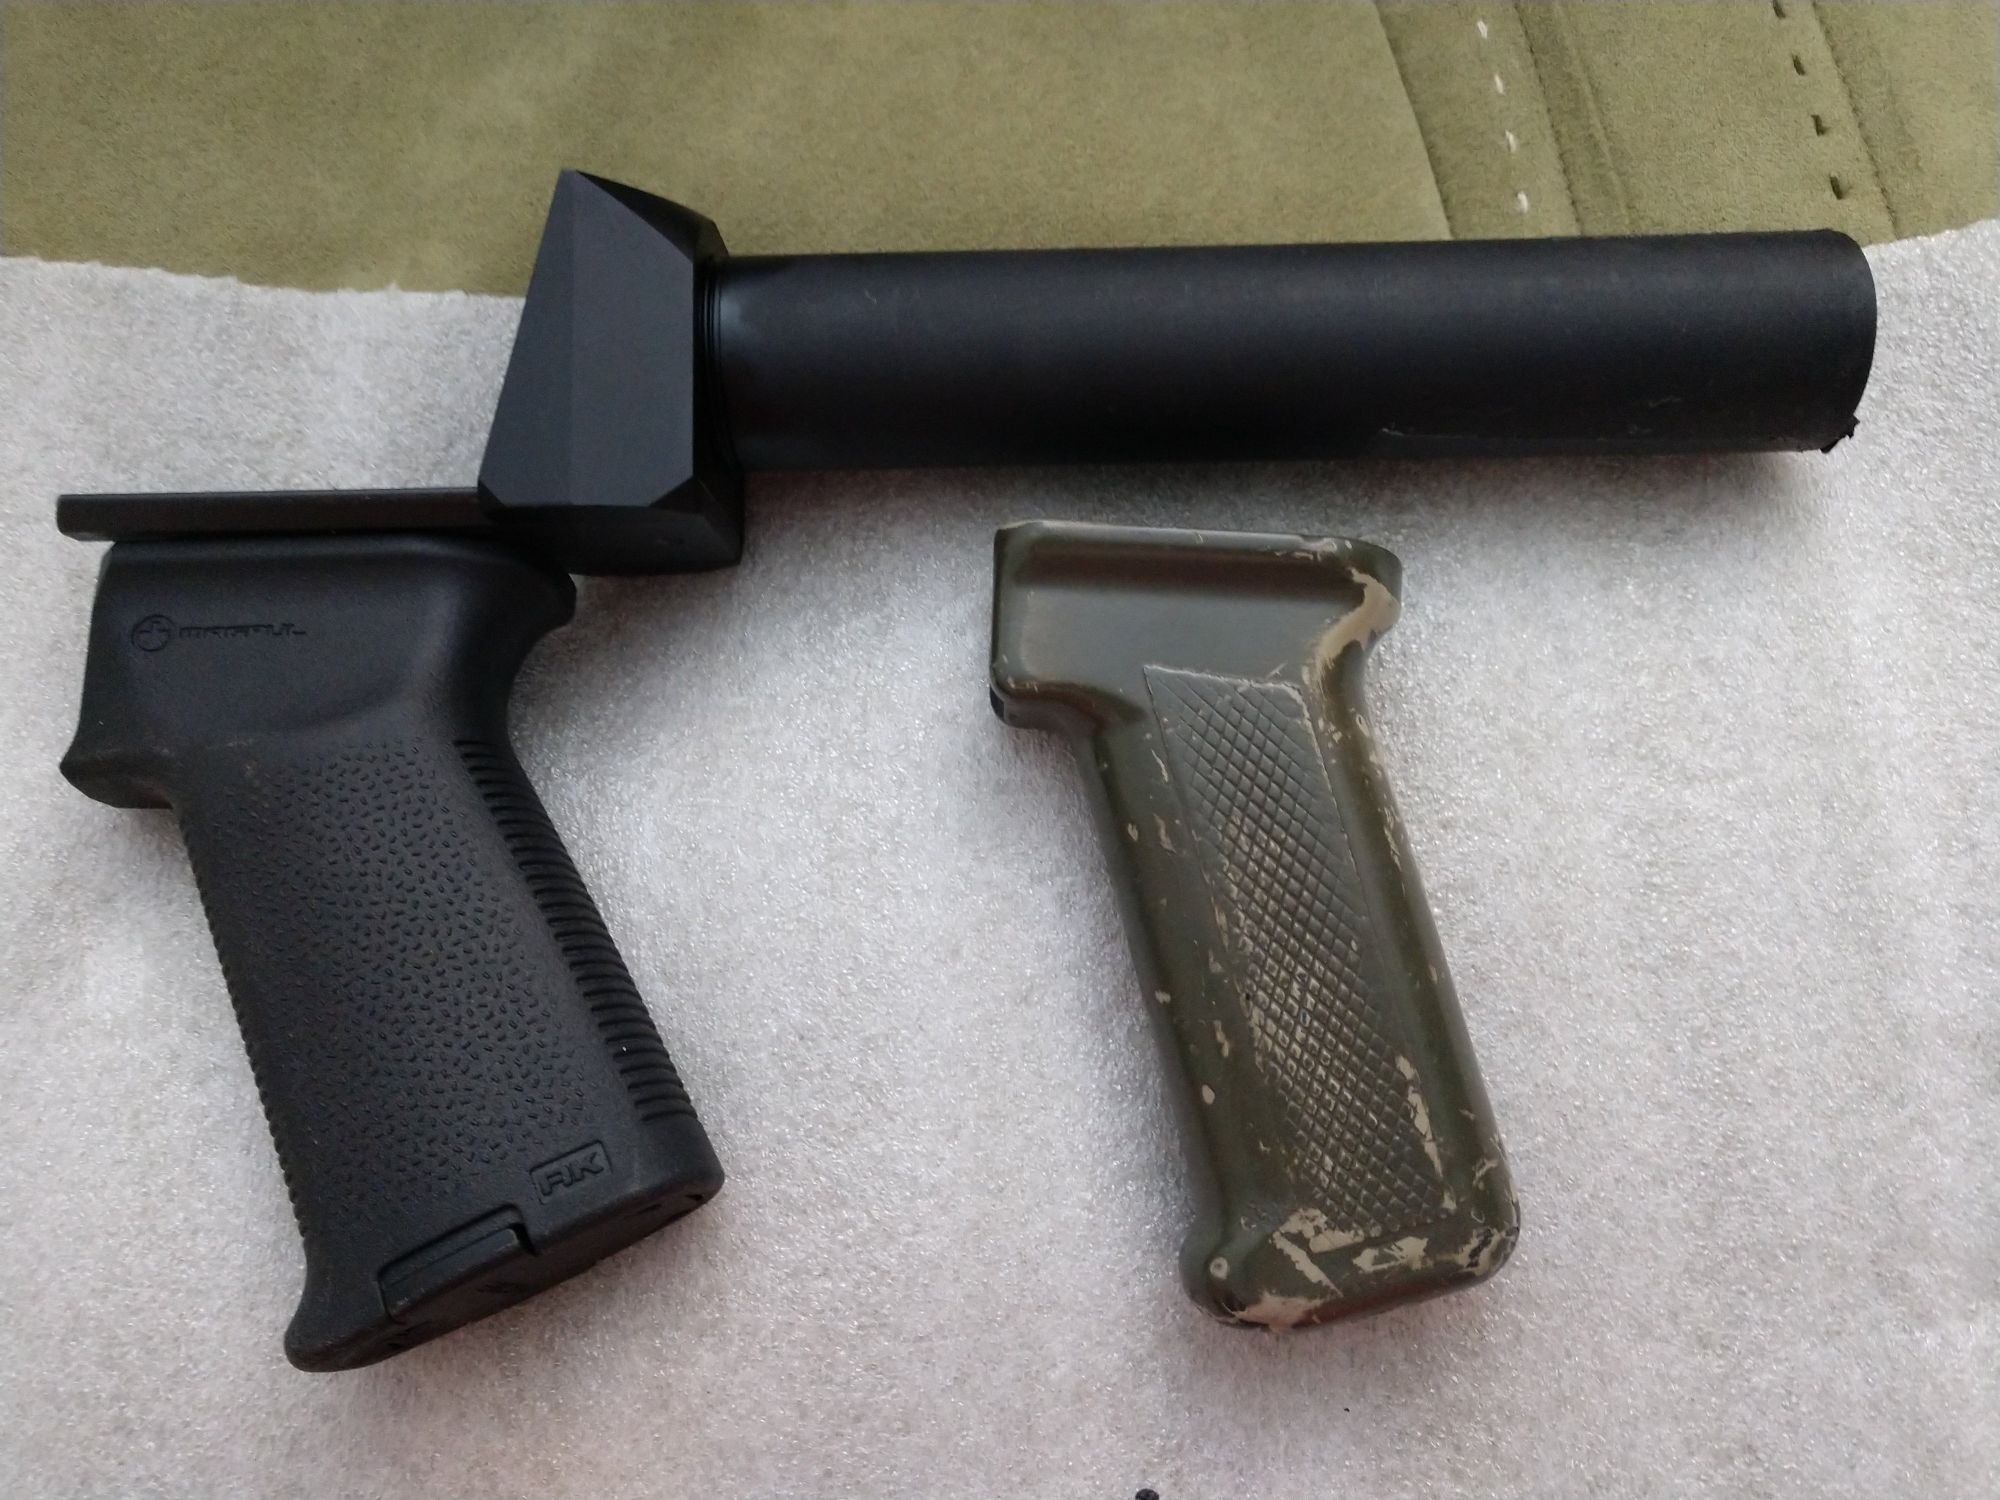 WTS: Draco brace/stock adapter and grips